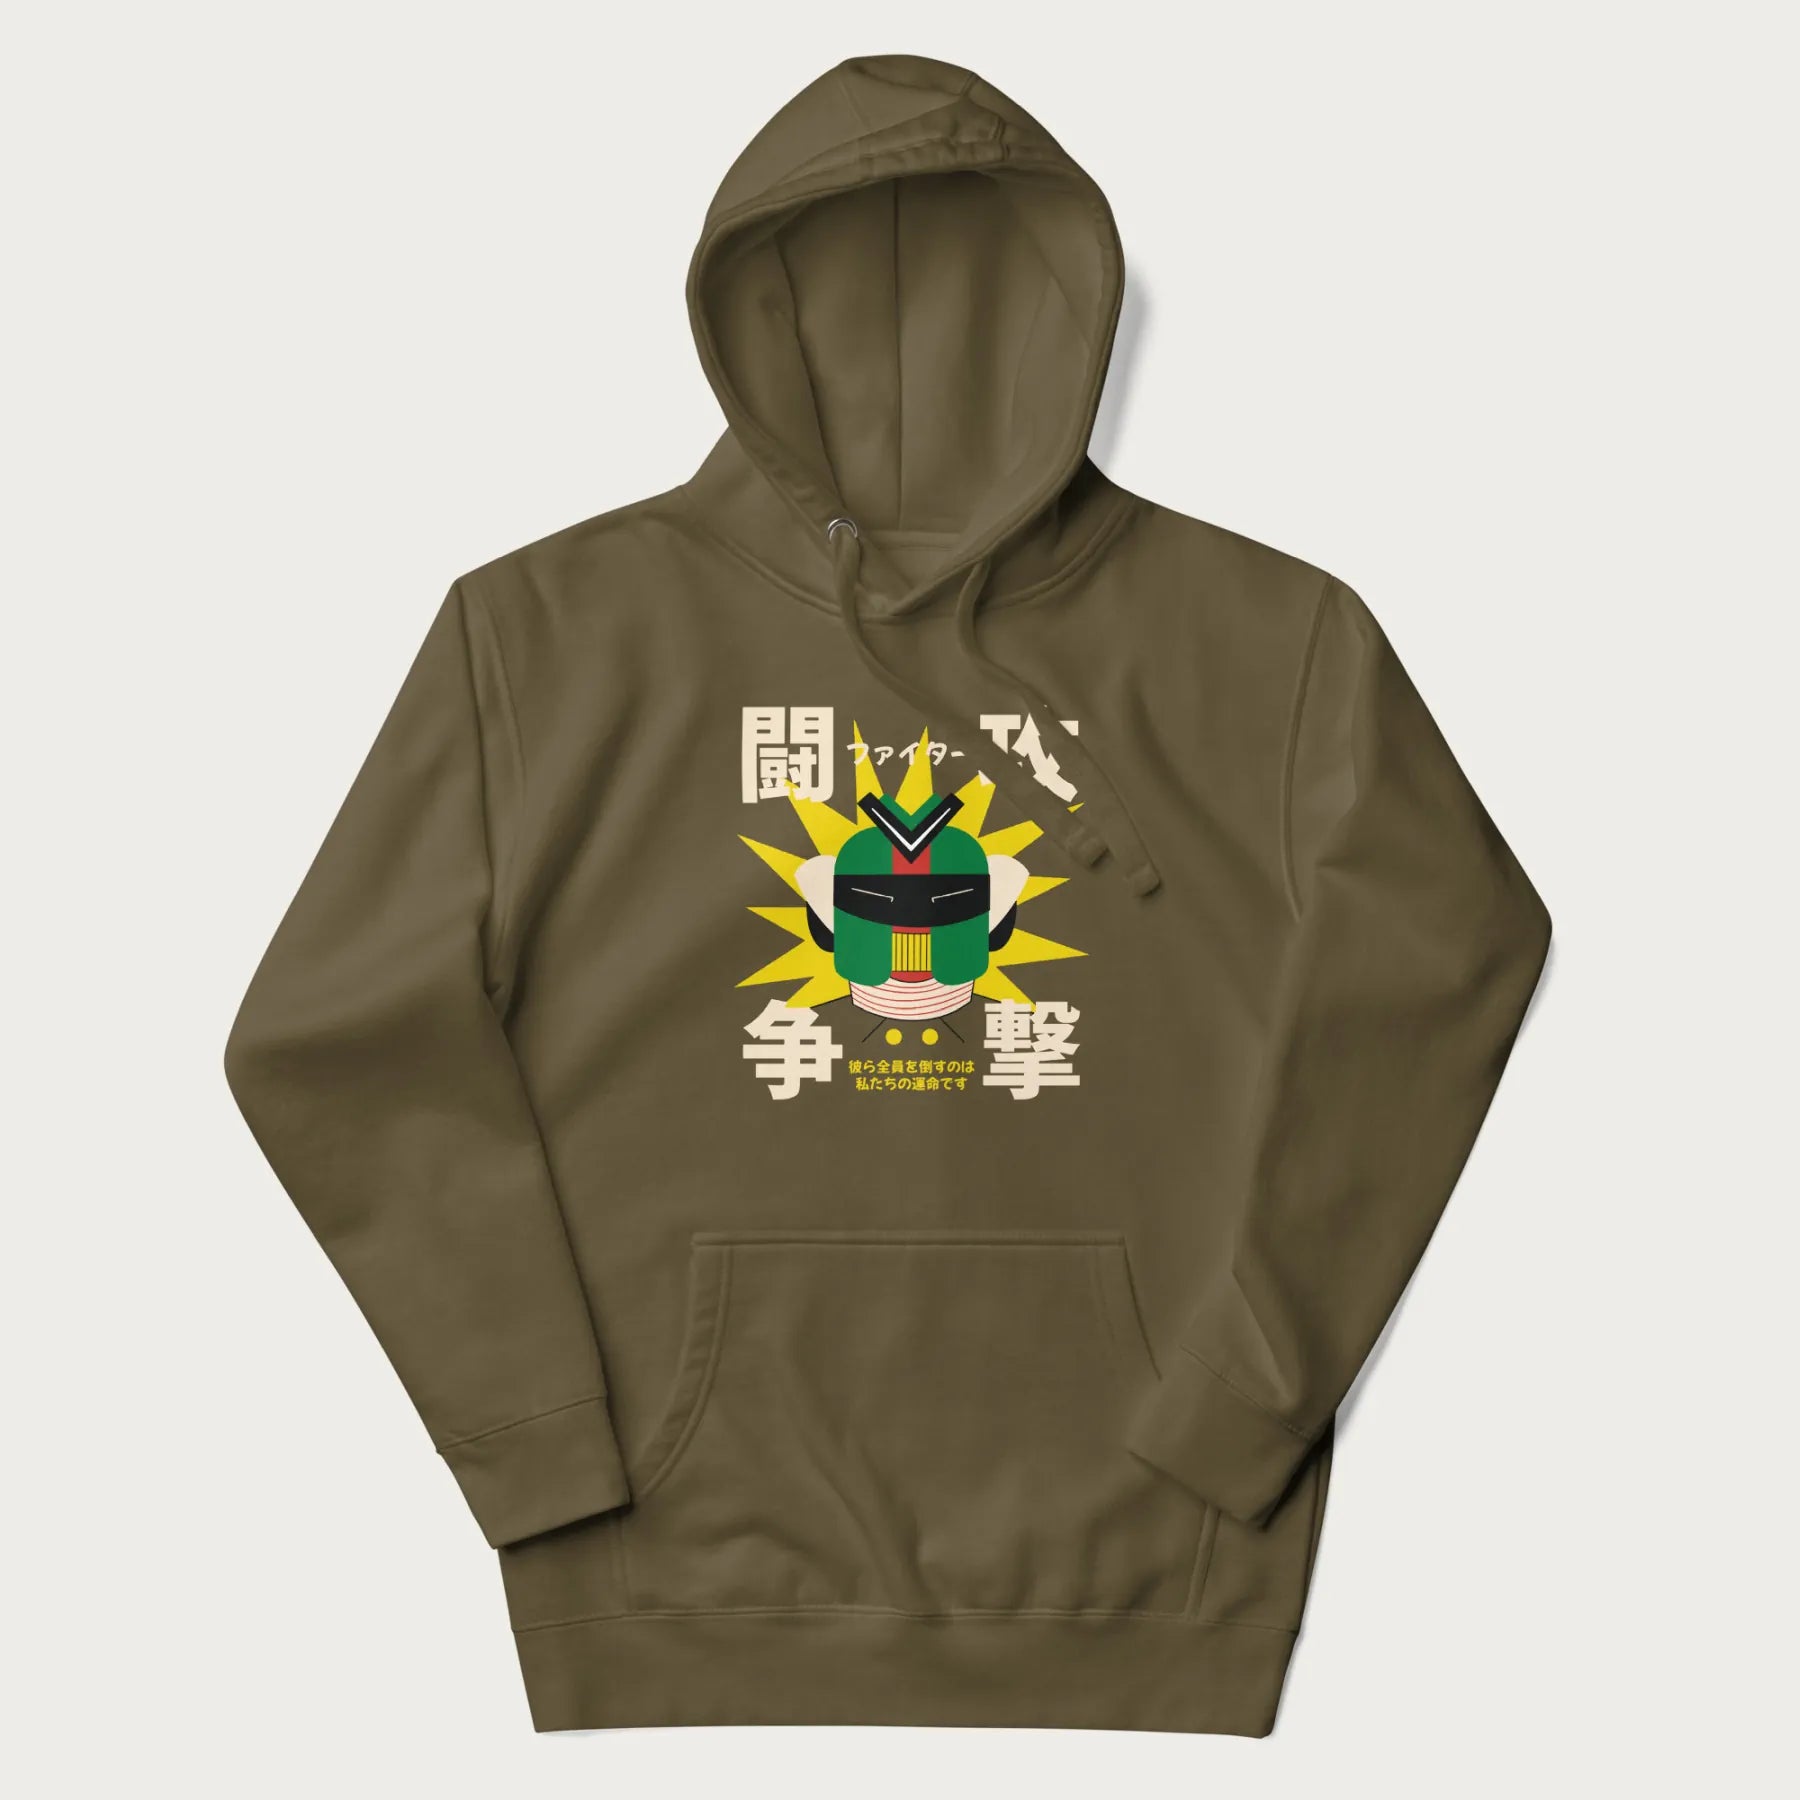 Military green hoodie with retro graphic of a mecha warrior and Japanese text for "Fight," "Attack," "Conflict," and "Destiny to defeat them all".